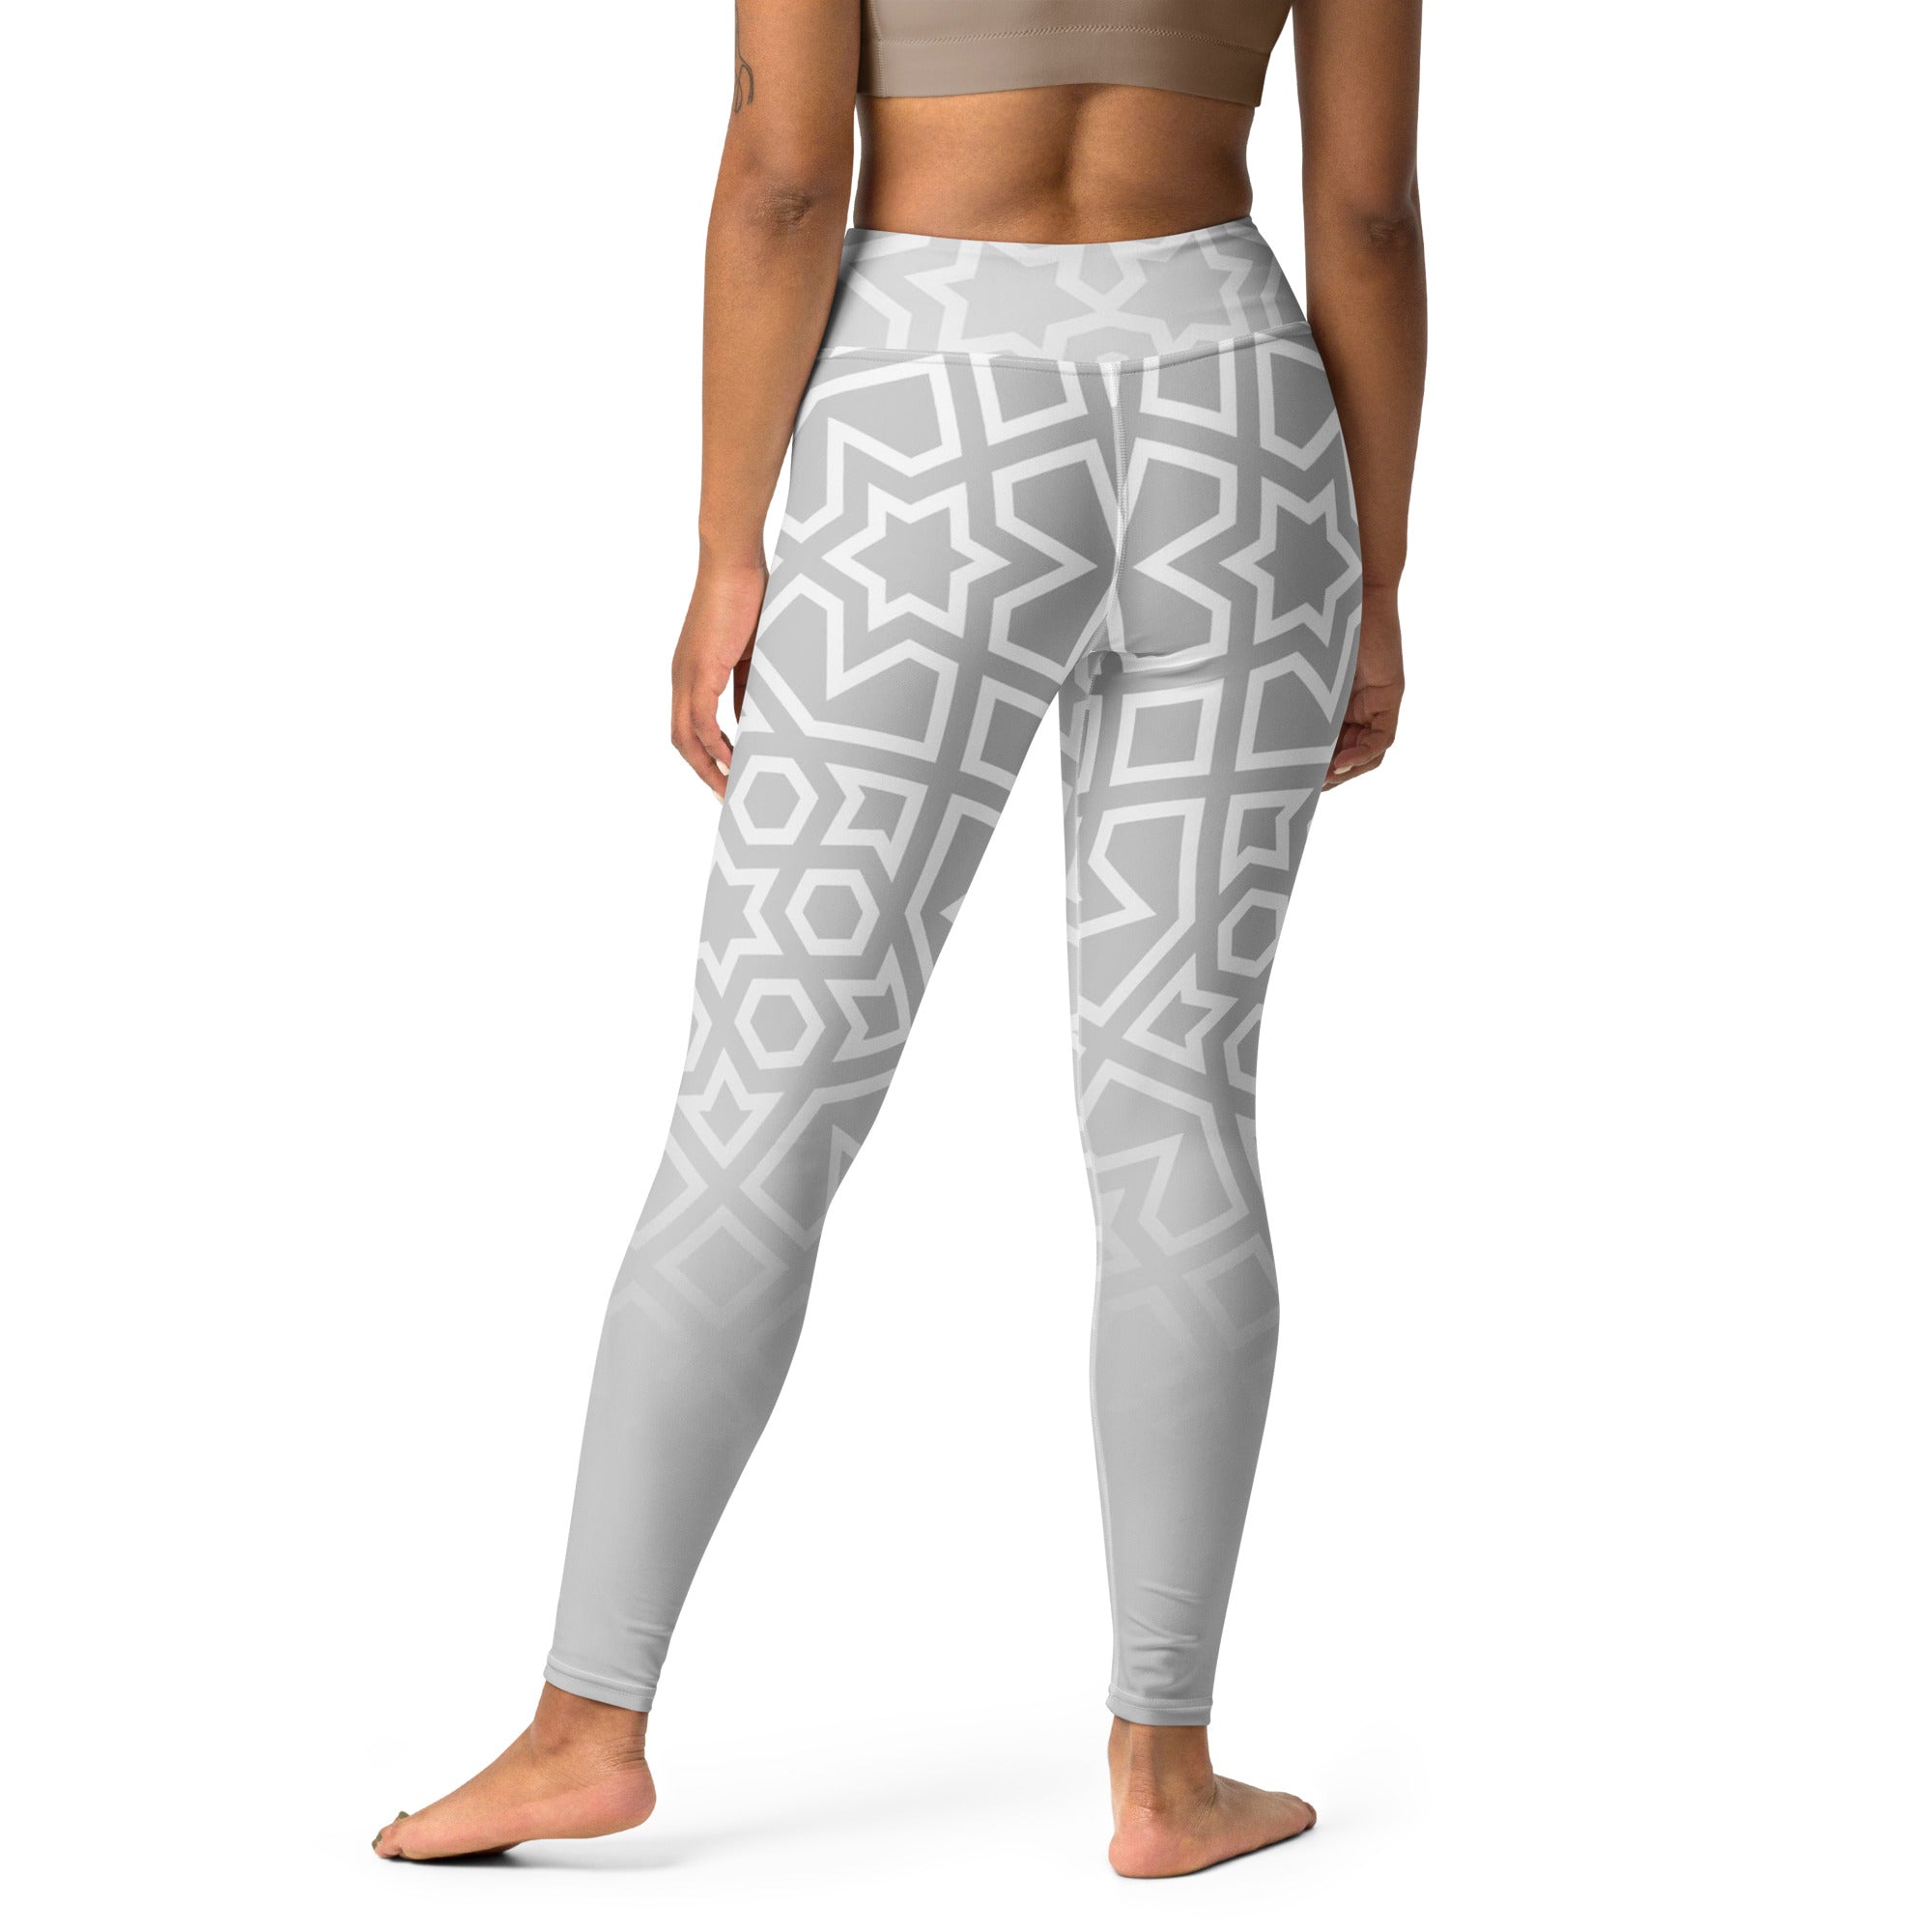 Tranquil Trek Yoga Leggings styled with a fitness outfit.